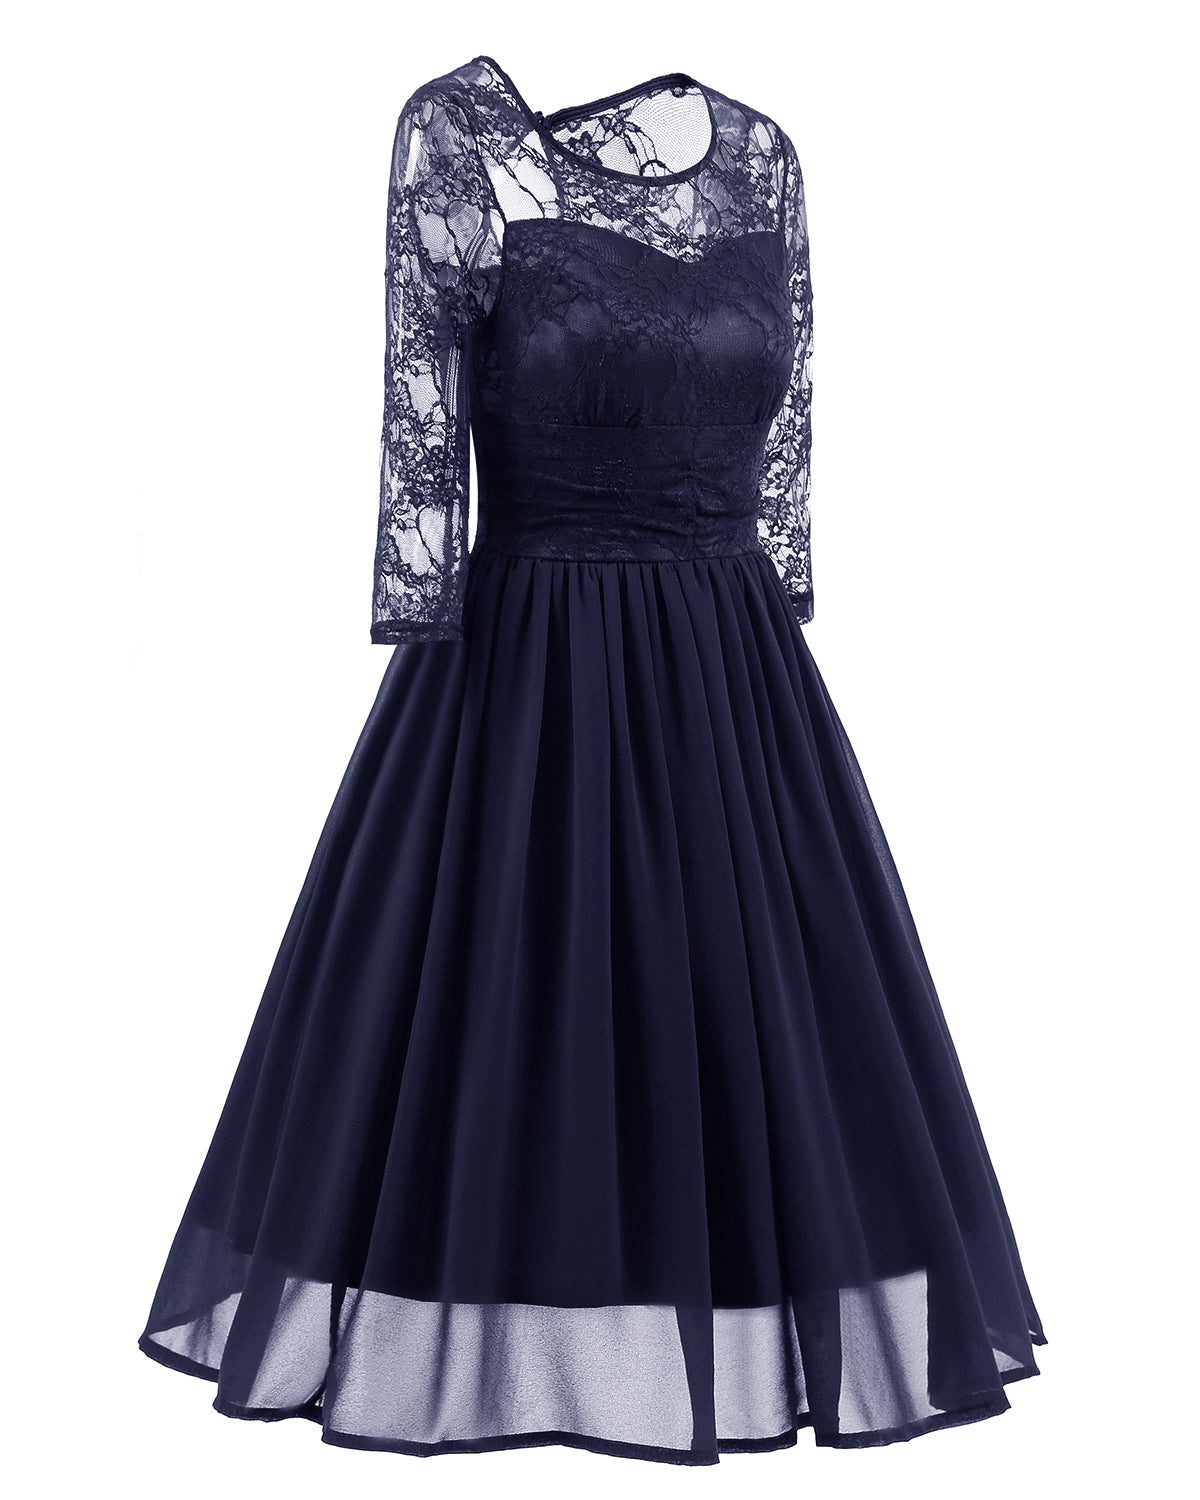 Classy Modest Navy Blue Lace Short Prom Dress with Sleeves,Blue Party Dress,1581N